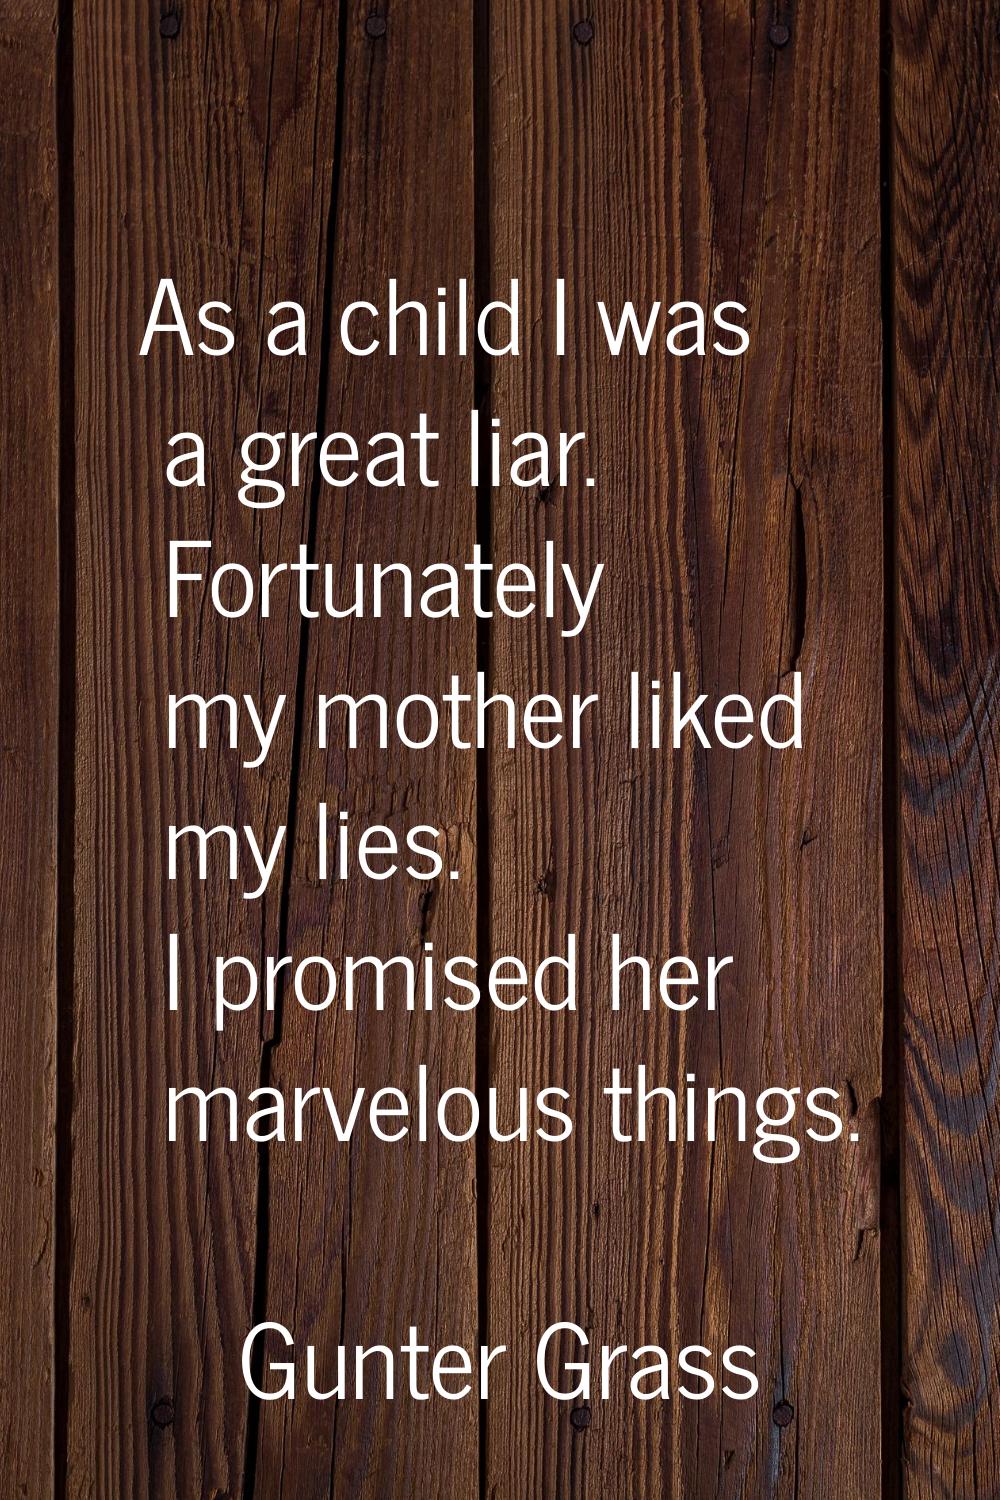 As a child I was a great liar. Fortunately my mother liked my lies. I promised her marvelous things